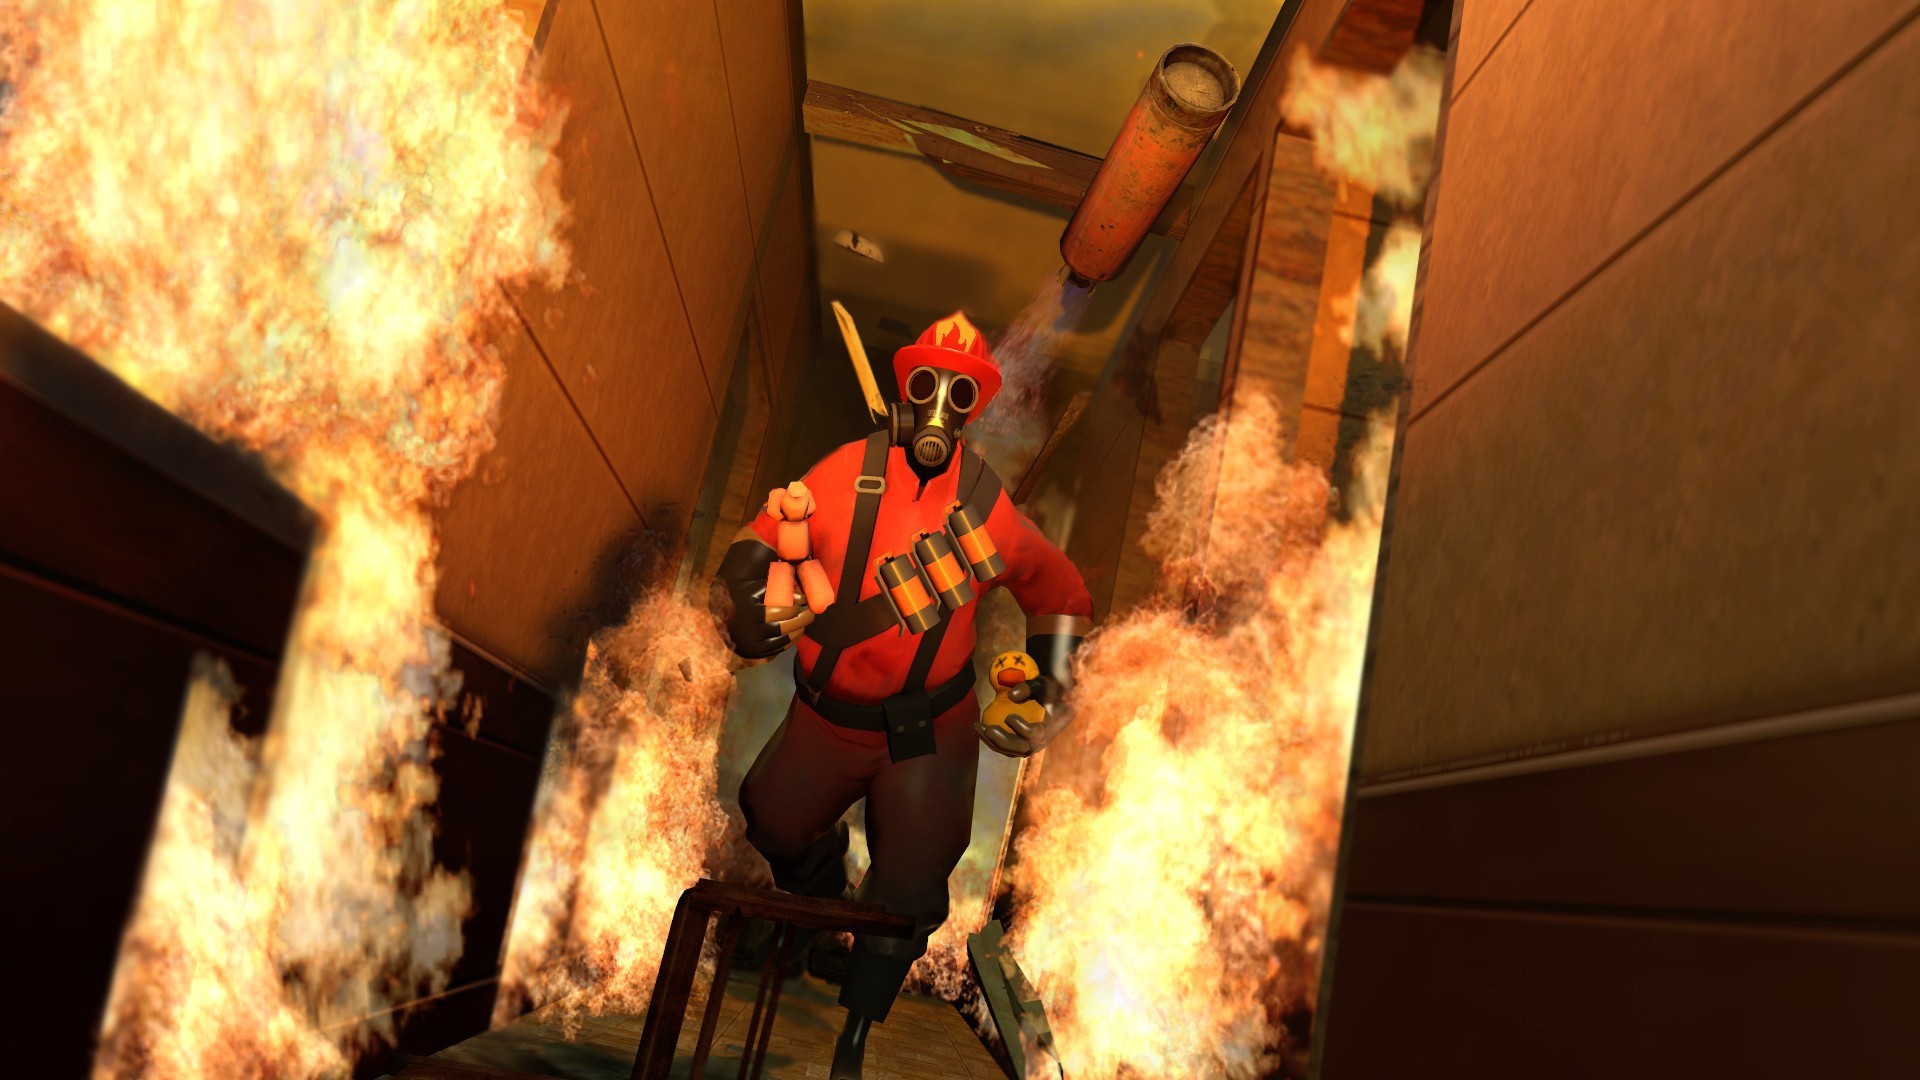 1920x1080 fire ducks Pyro TF2 fireworks dogs toys (children) firefighter Team  Fortress 2 balloons save